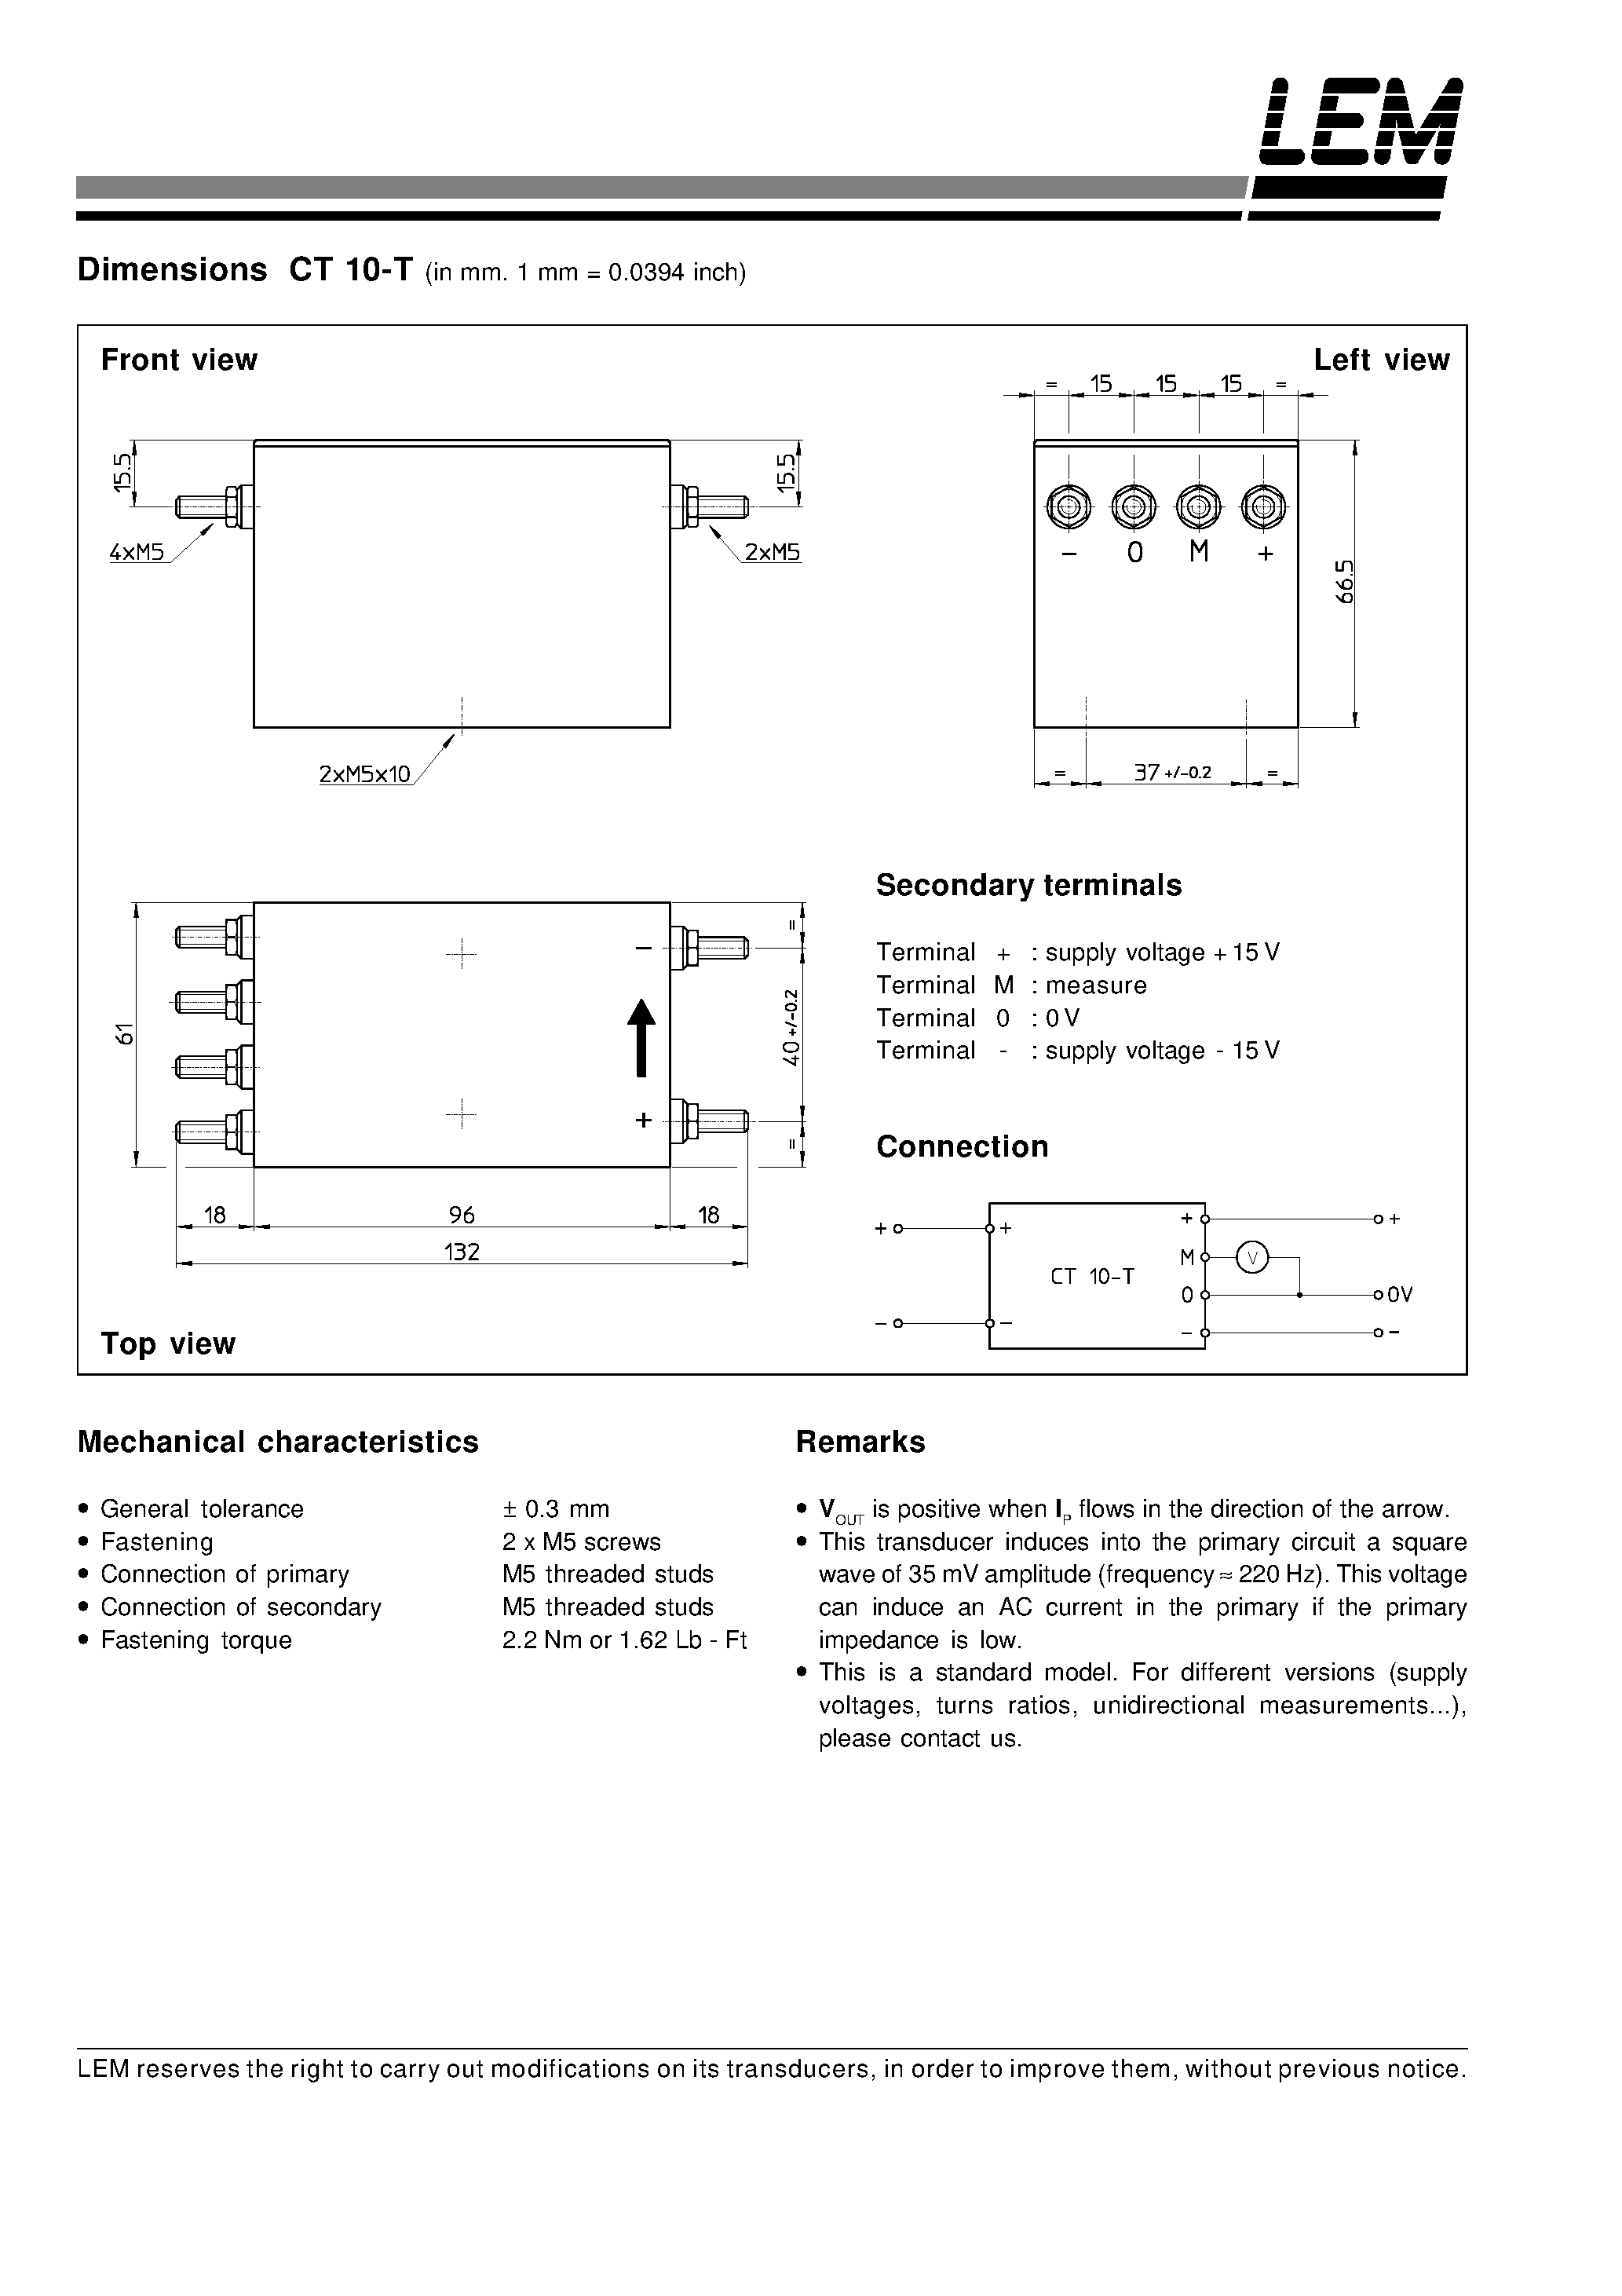 Datasheet CT10-T - Current Transducers CT 10-T page 2